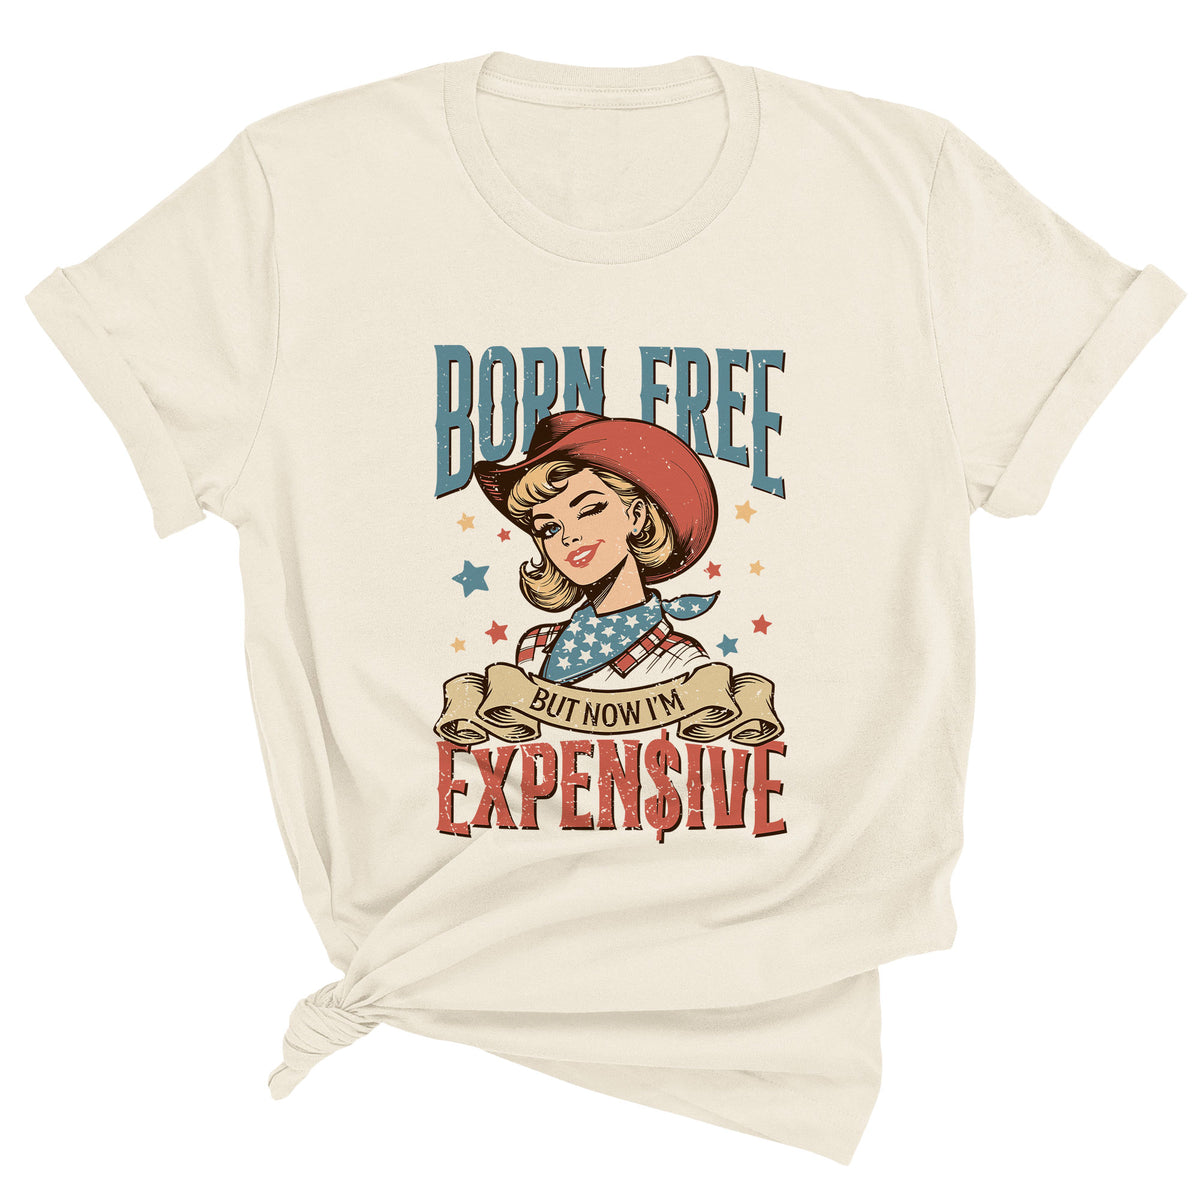 Born Free But Now I'm Expensive Unisex T-Shirt